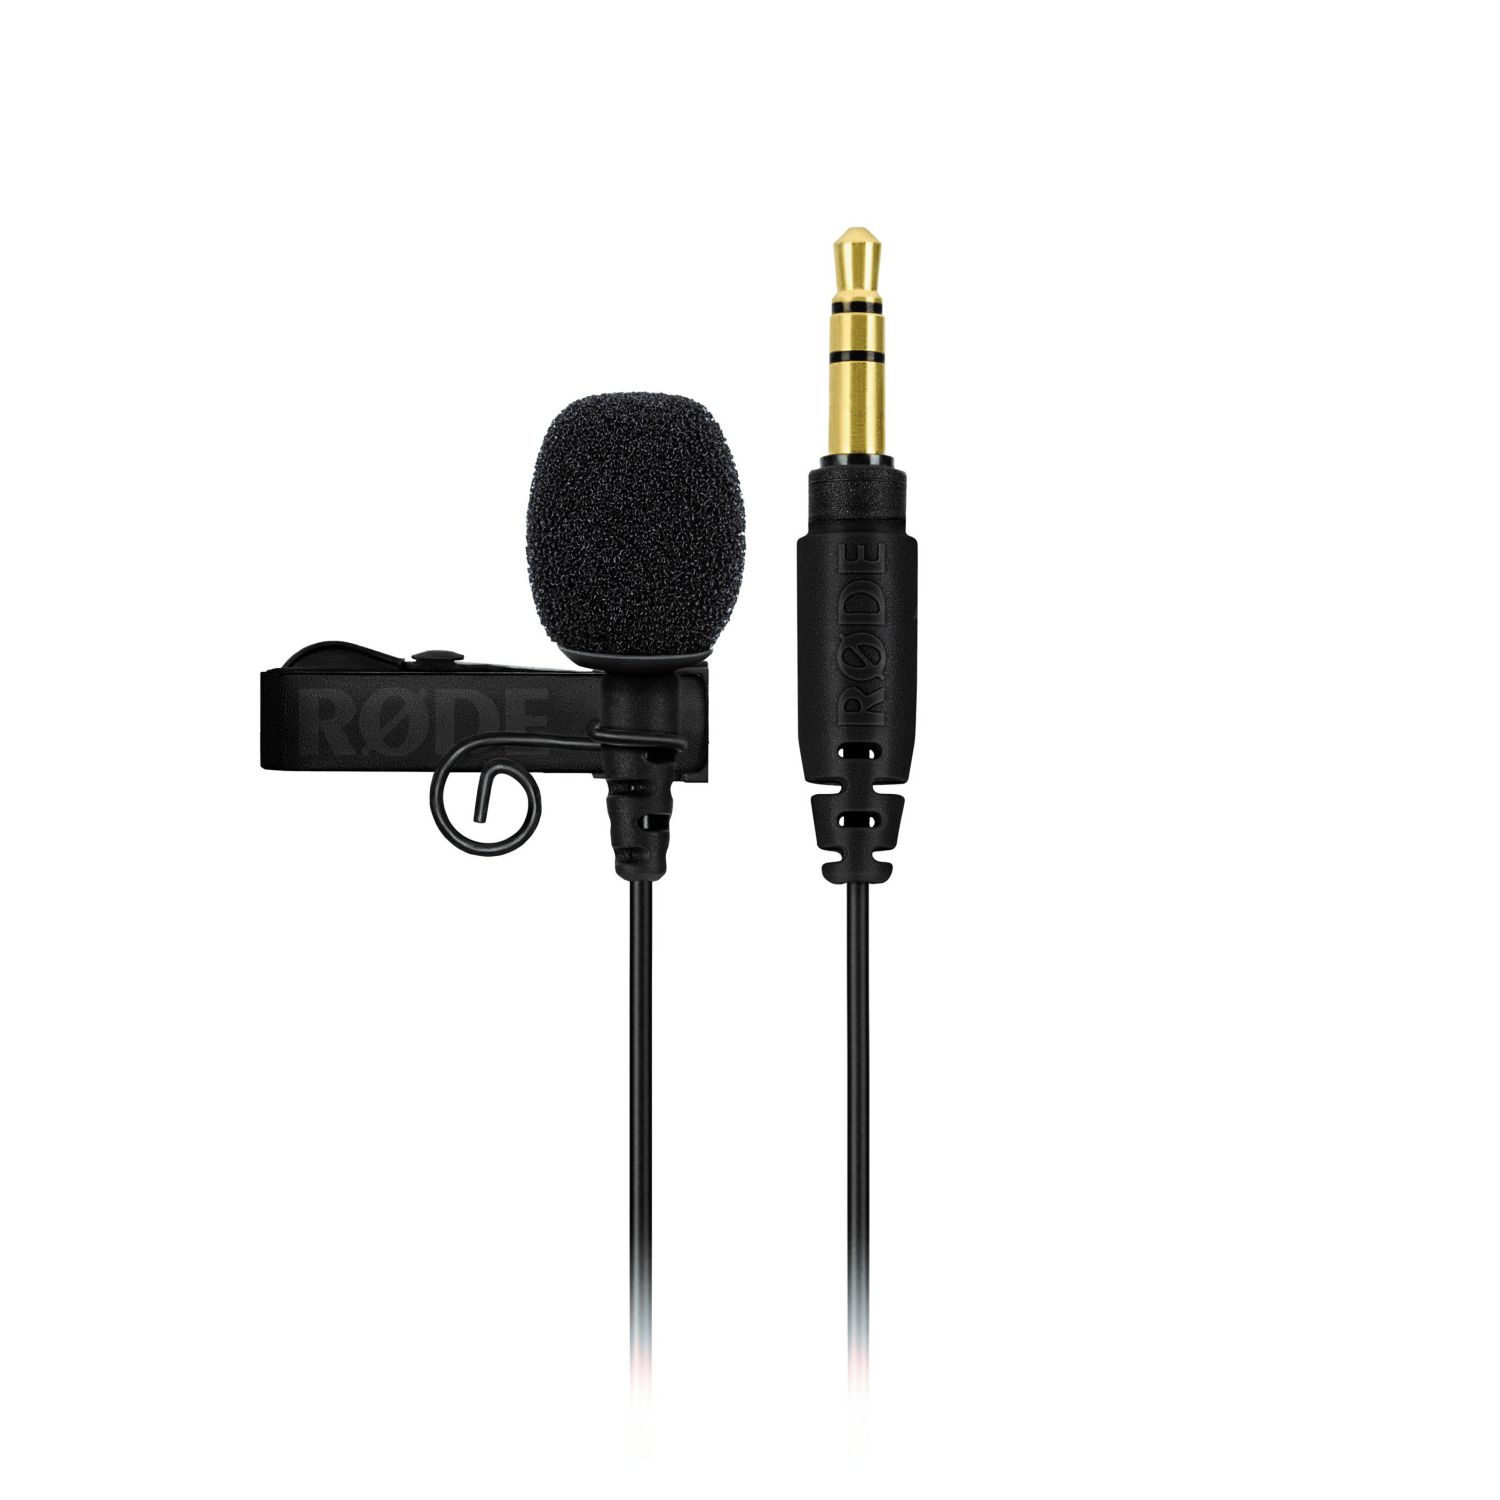 An image of Rode Lav Go Clip-On Lavalier Microphone | PMT Online